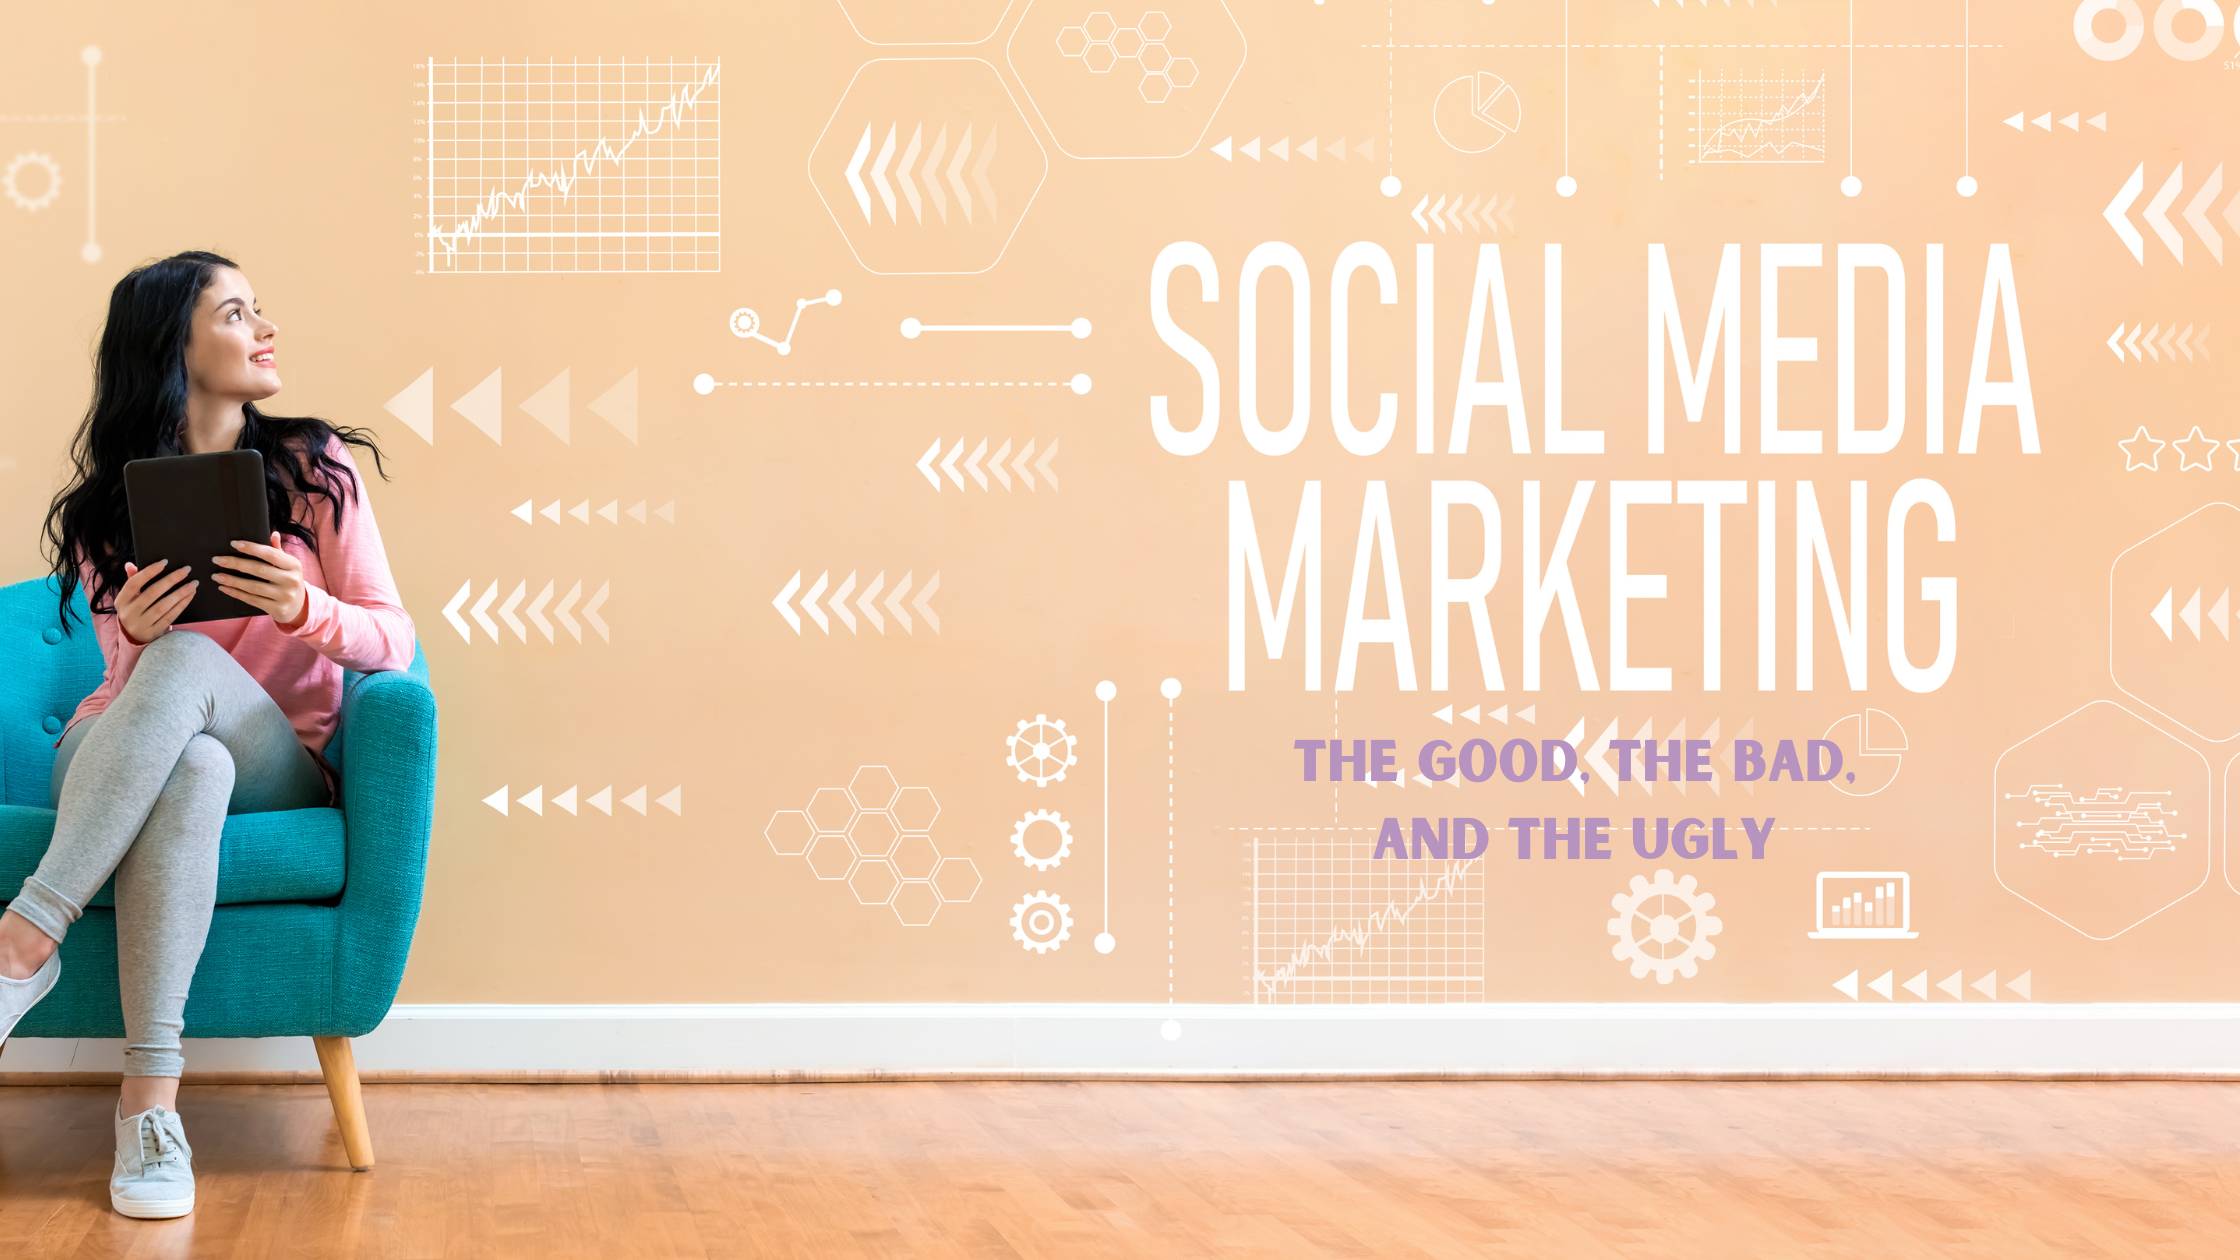 What is Social Media Marketing: The Good, The Bad, and The Ugly